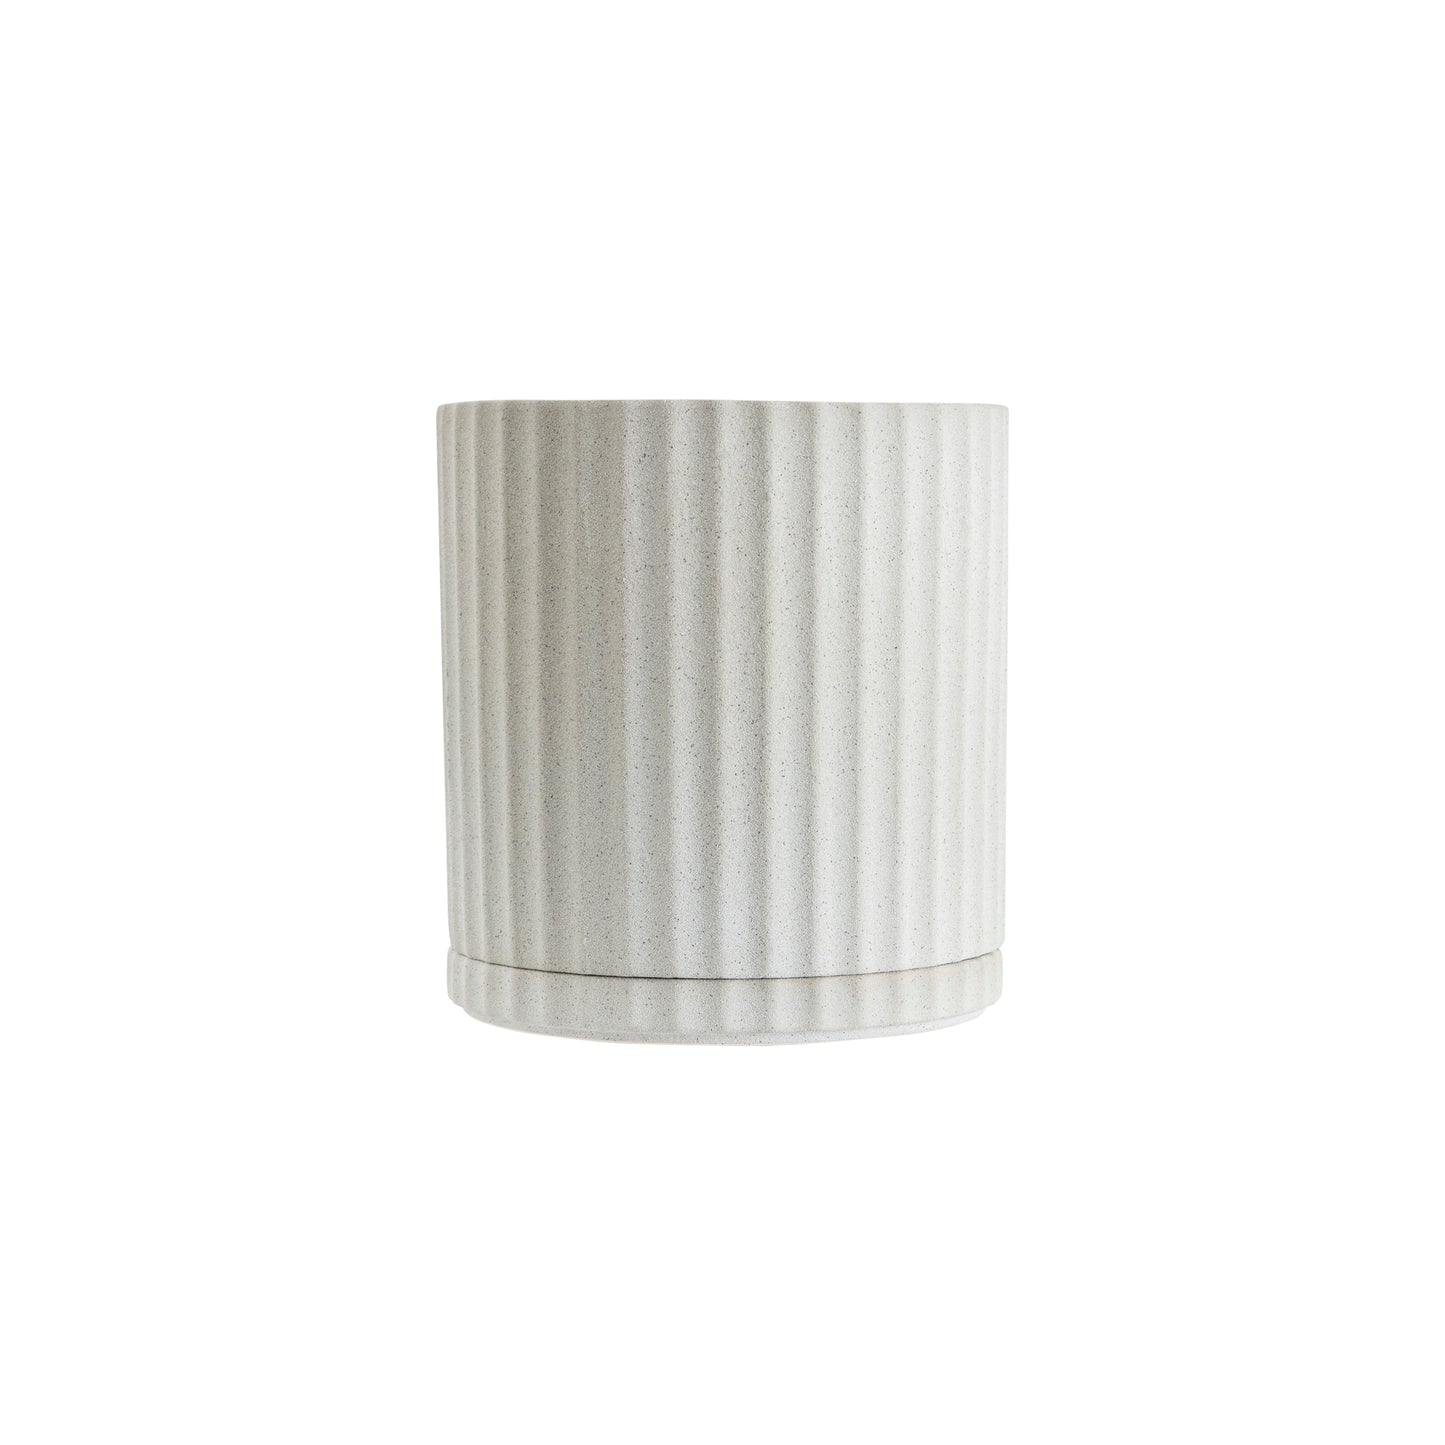 Inspired by the pillars at the Acropolis, the Athens planter in white combines classic style with the functionality of a drainage hole and matching saucer.   Mix and match plant pots to add personality and greenery to any space.  Colour: sand   Dimensions: 16.5cm internal diameter x 19cm high